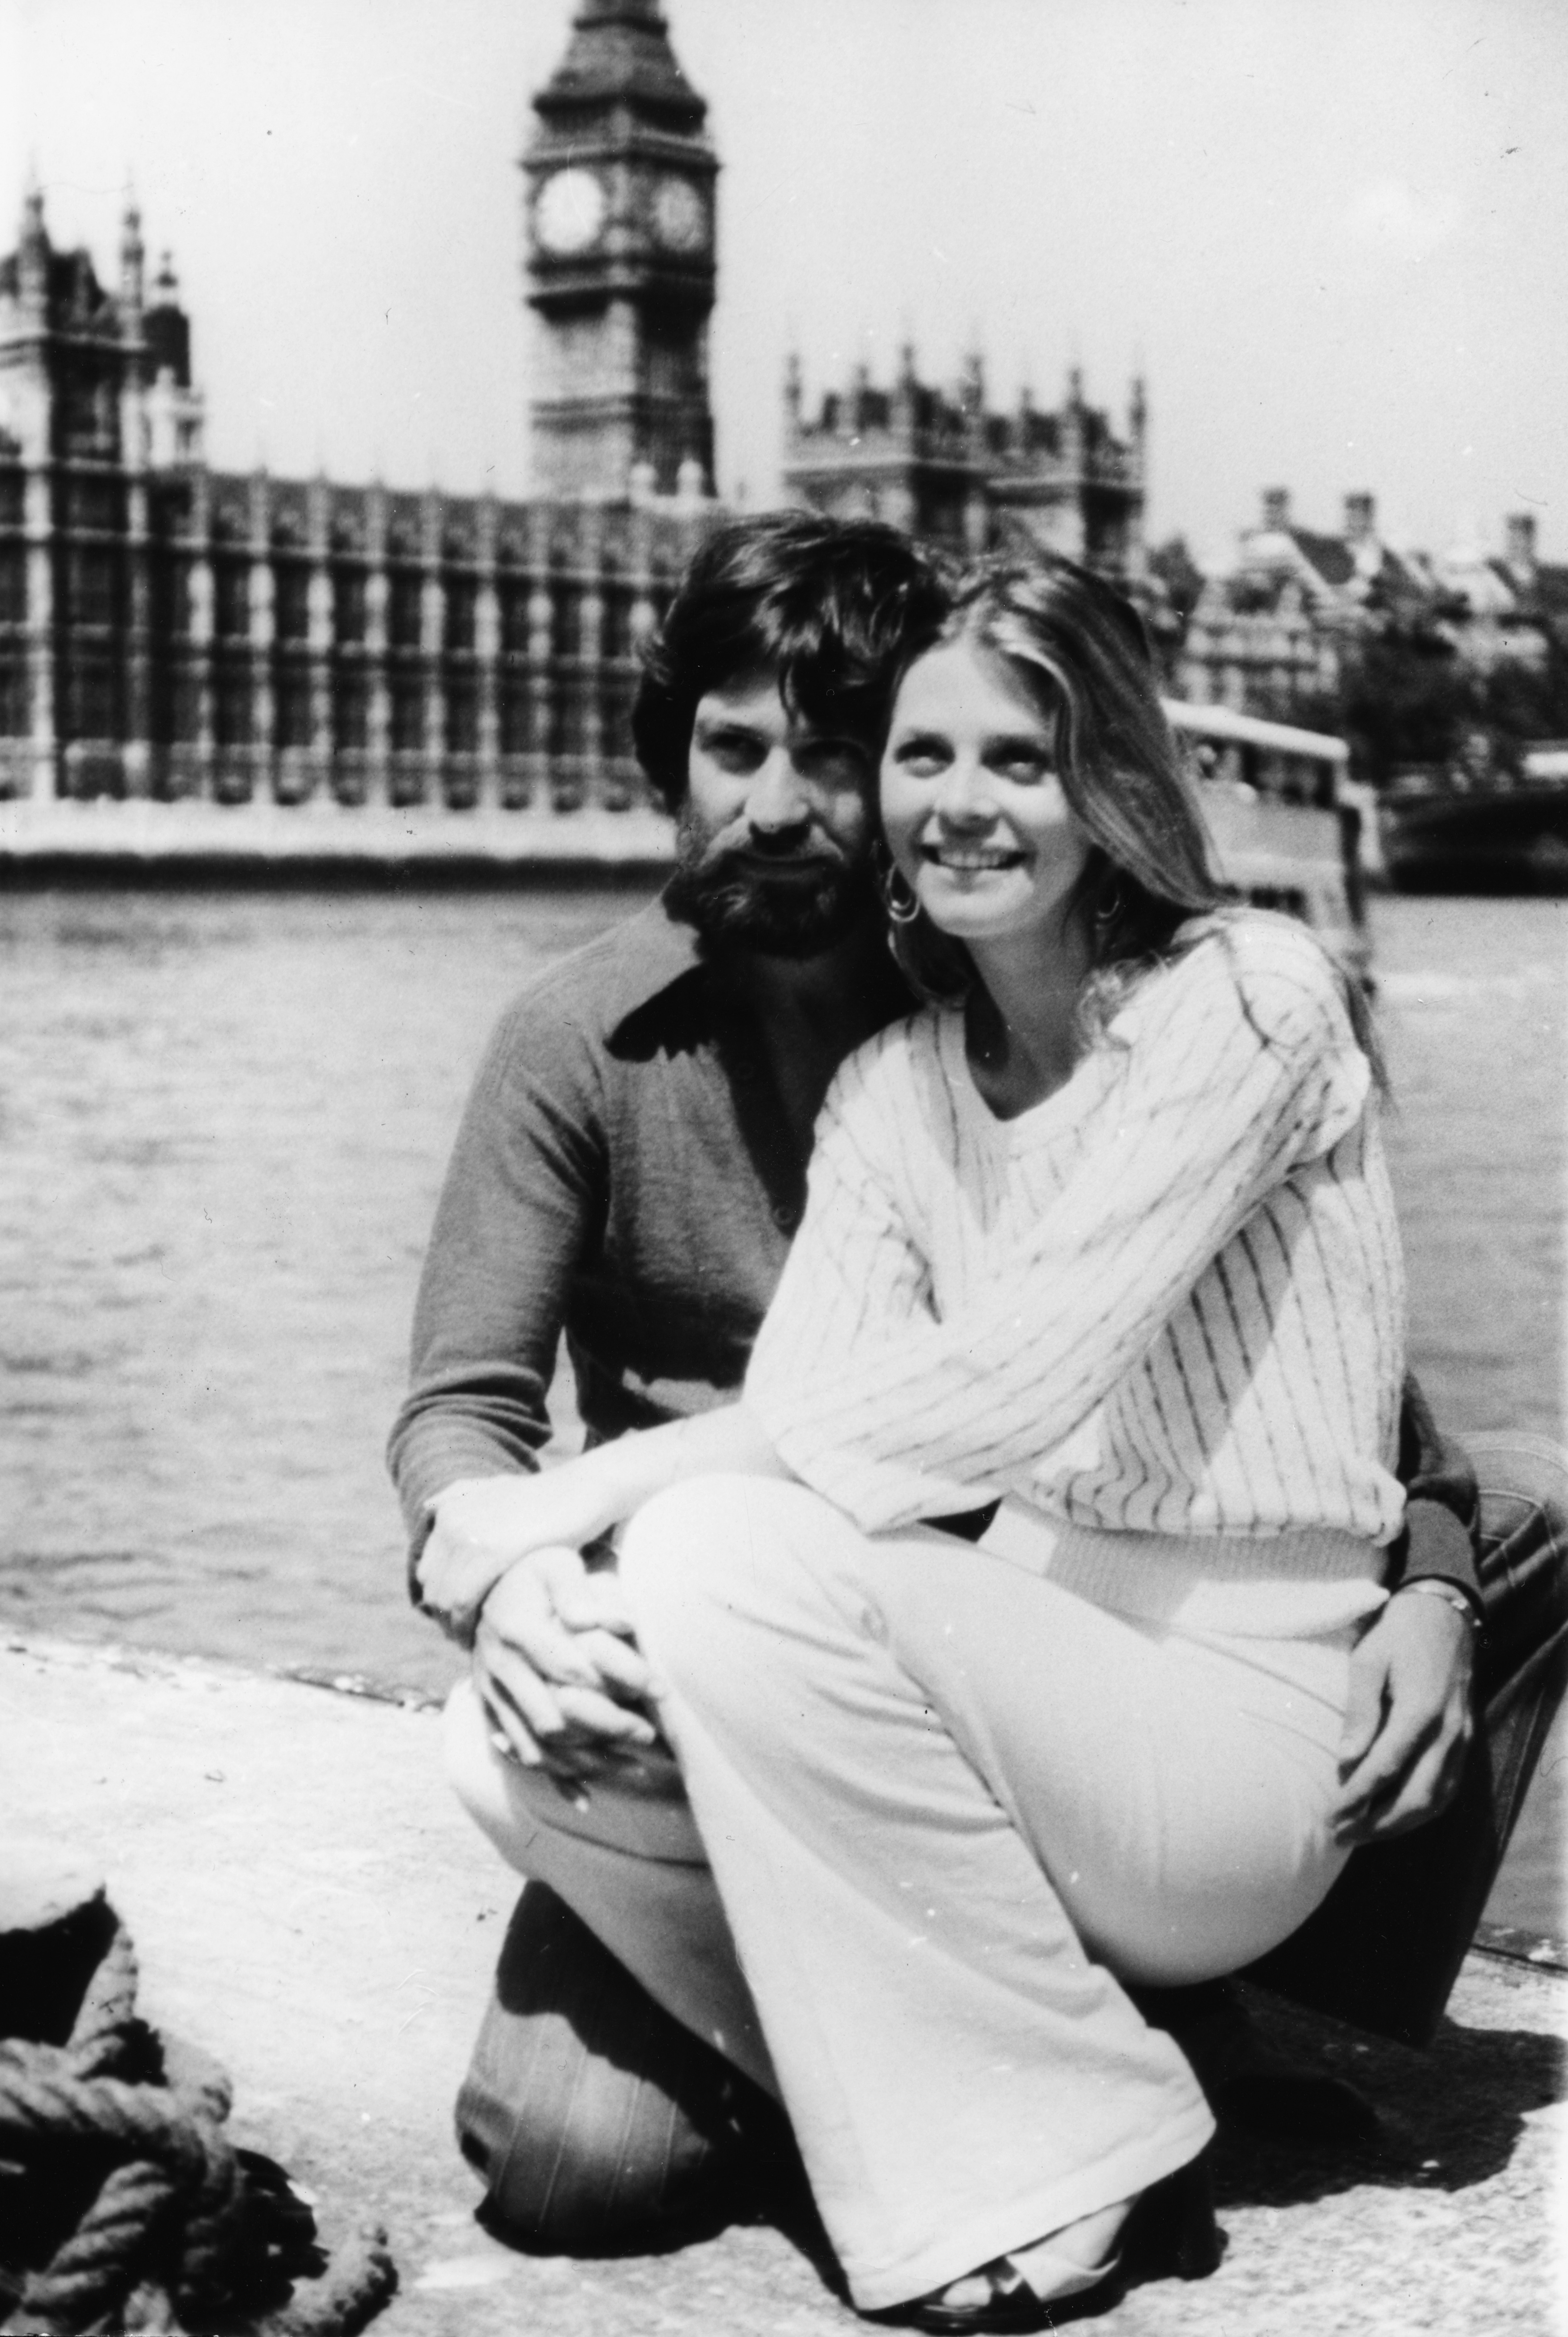 Michael Brandon and Lindsay Wagner posing on the bank of the River Thames, in London, England, to promote her show "The Bionic Woman" on June 9, 1976 | Source: Getty Images